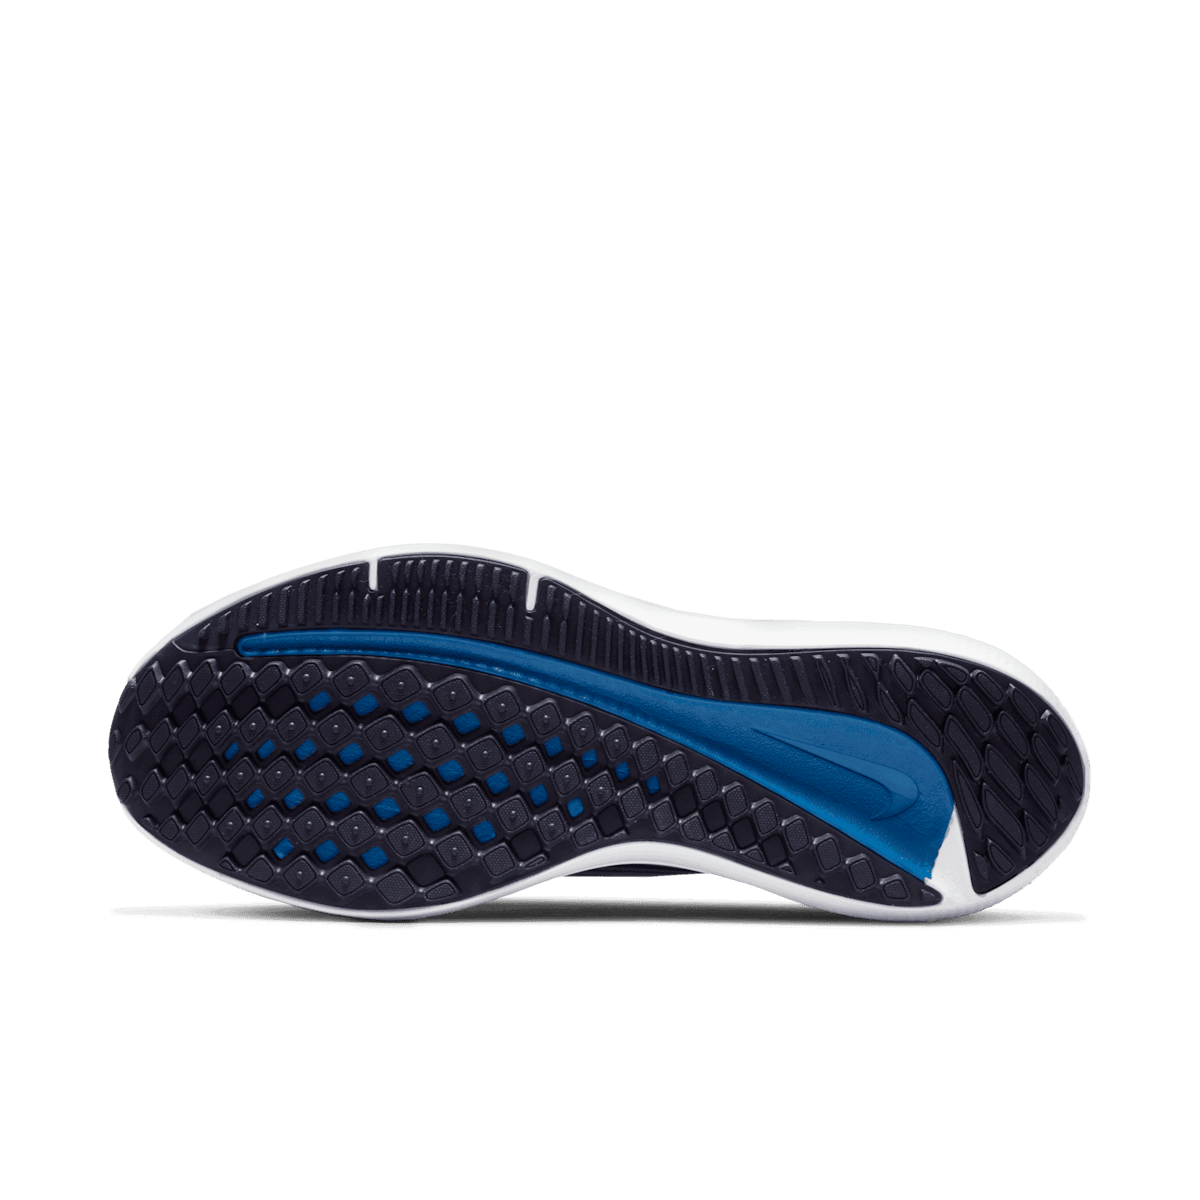 Nike Winflo 9 Road Running Shoes in Blue Angle 0